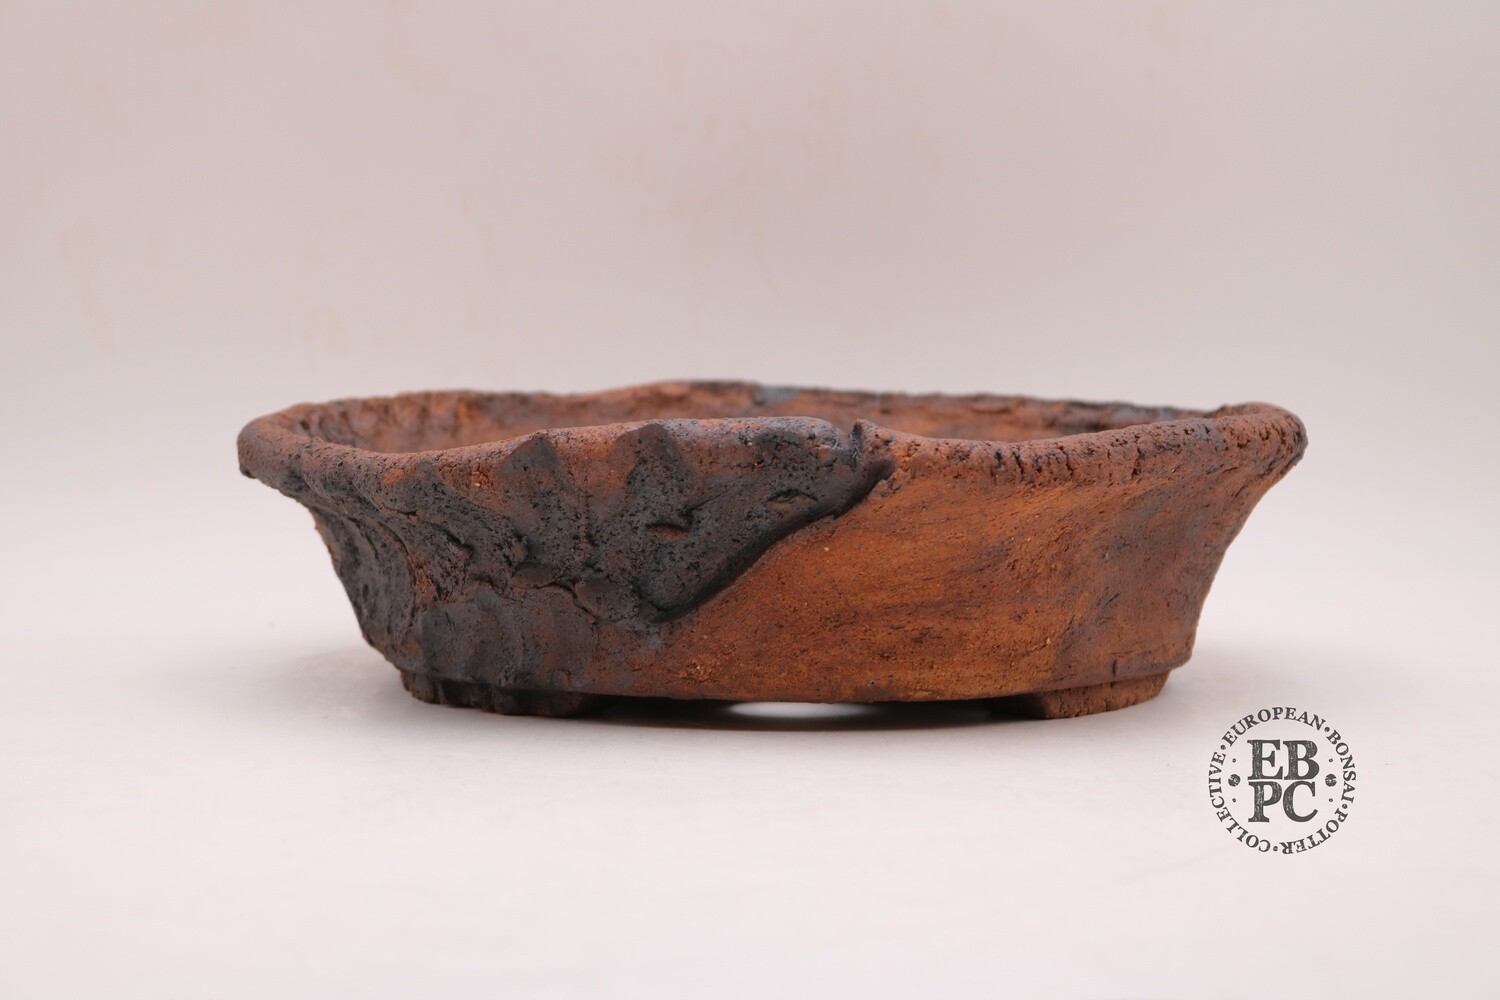 SOLD - Dragonfly Bonsai Pots. 30.6cm; Unglazed; Dual-Tone Nanban; Rusty Browns; Stone Greys; Reds; Natural Textures; Aged finish